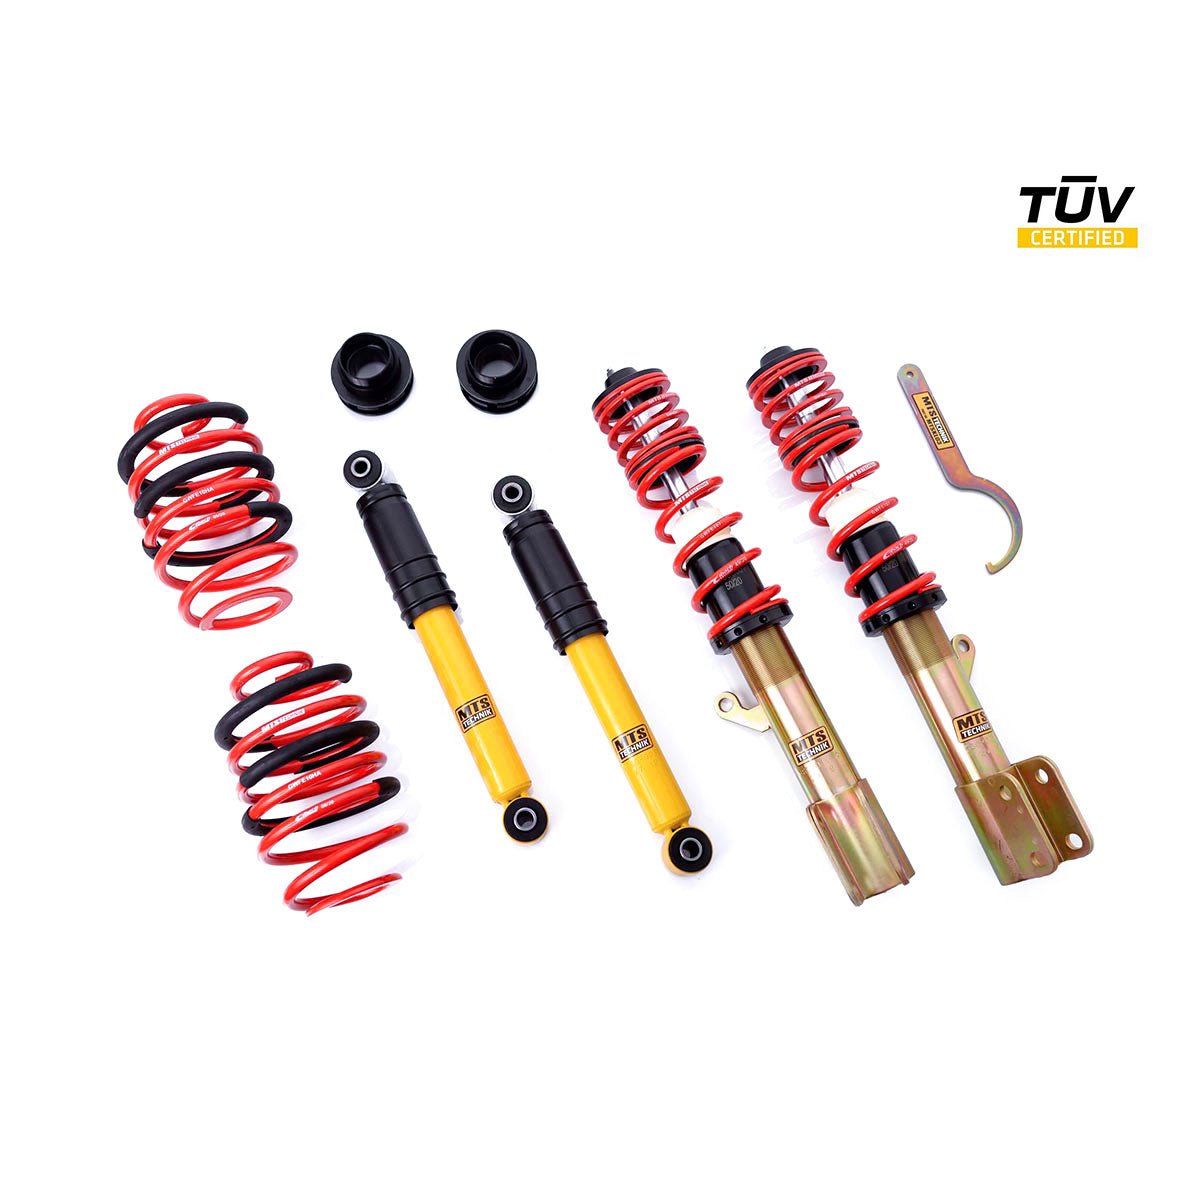 MTS TECHNIK coilover kit COMFORT Opel Astra G Hatchback (with TÜV) - PARTS33 GmbH